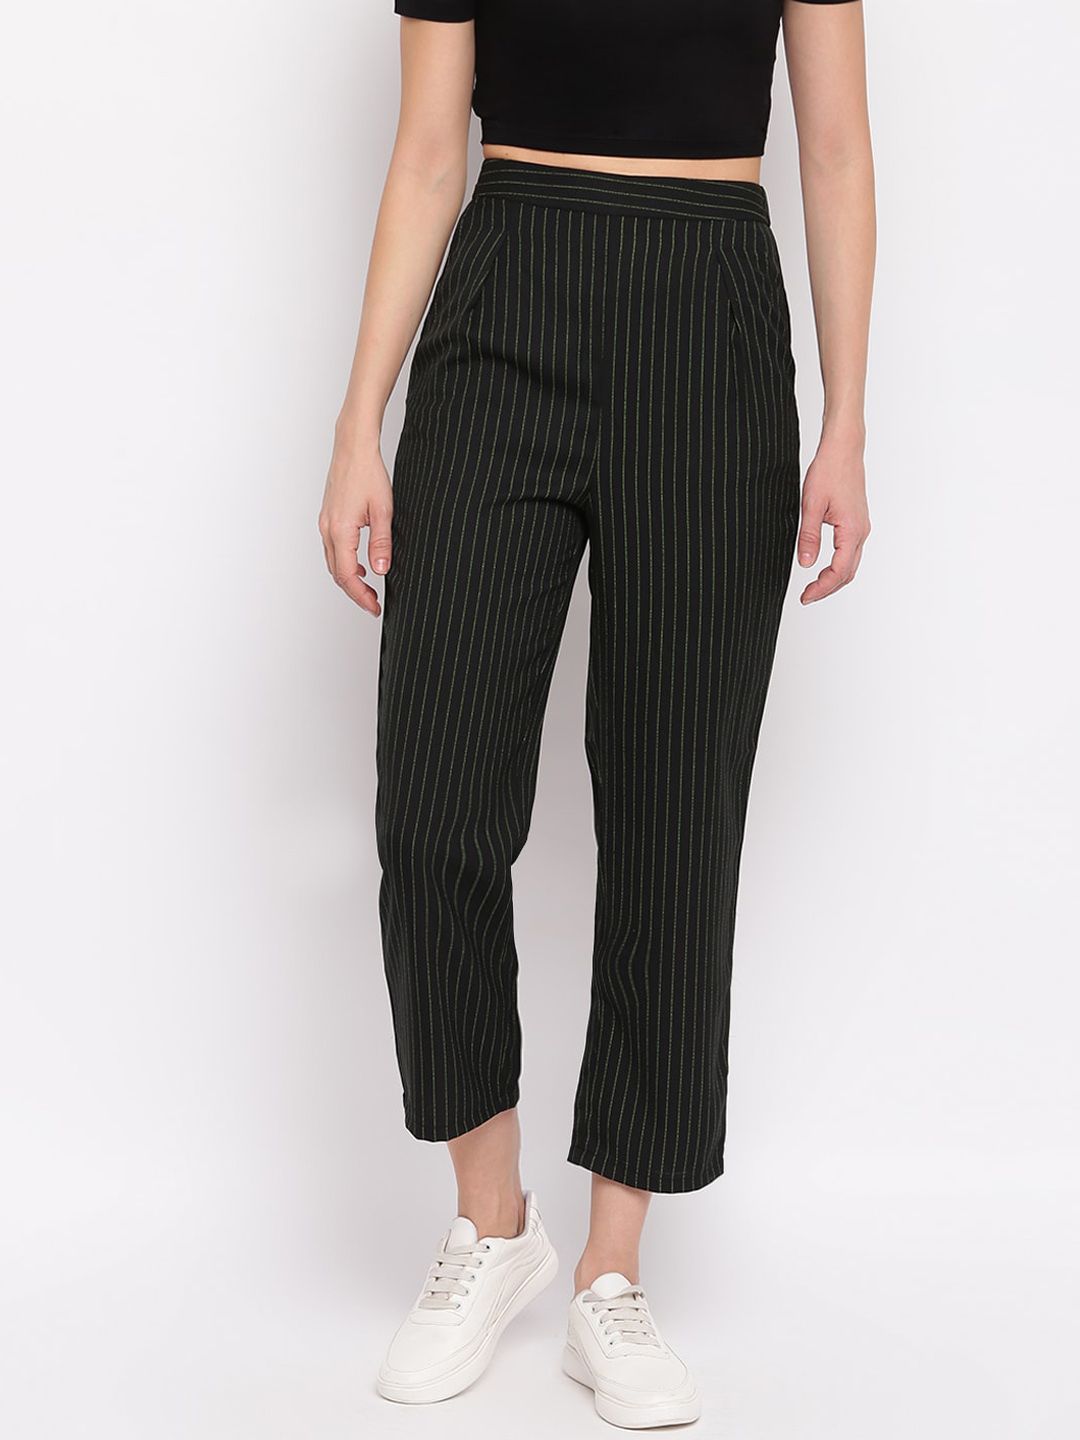 Mayra Women Black Striped Cotton Regular Fit Trousers Price in India